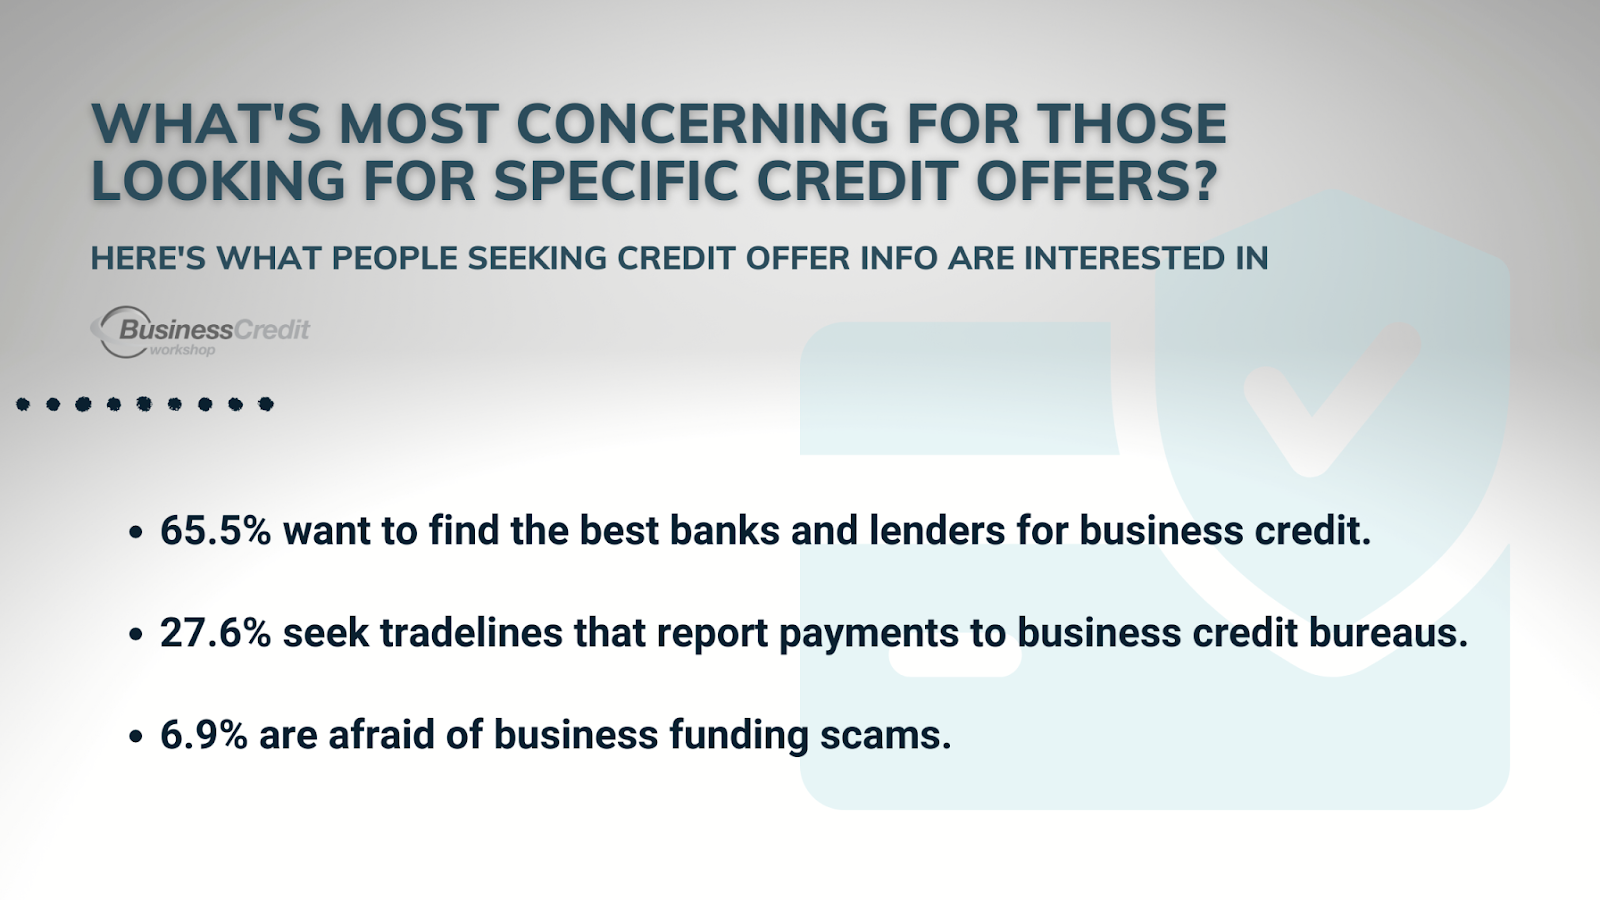 People looking for specific business credit offers want to find the best banks and lenders, discover which vendors report to business credit bureaus, or learn how to spot a financial scam. 